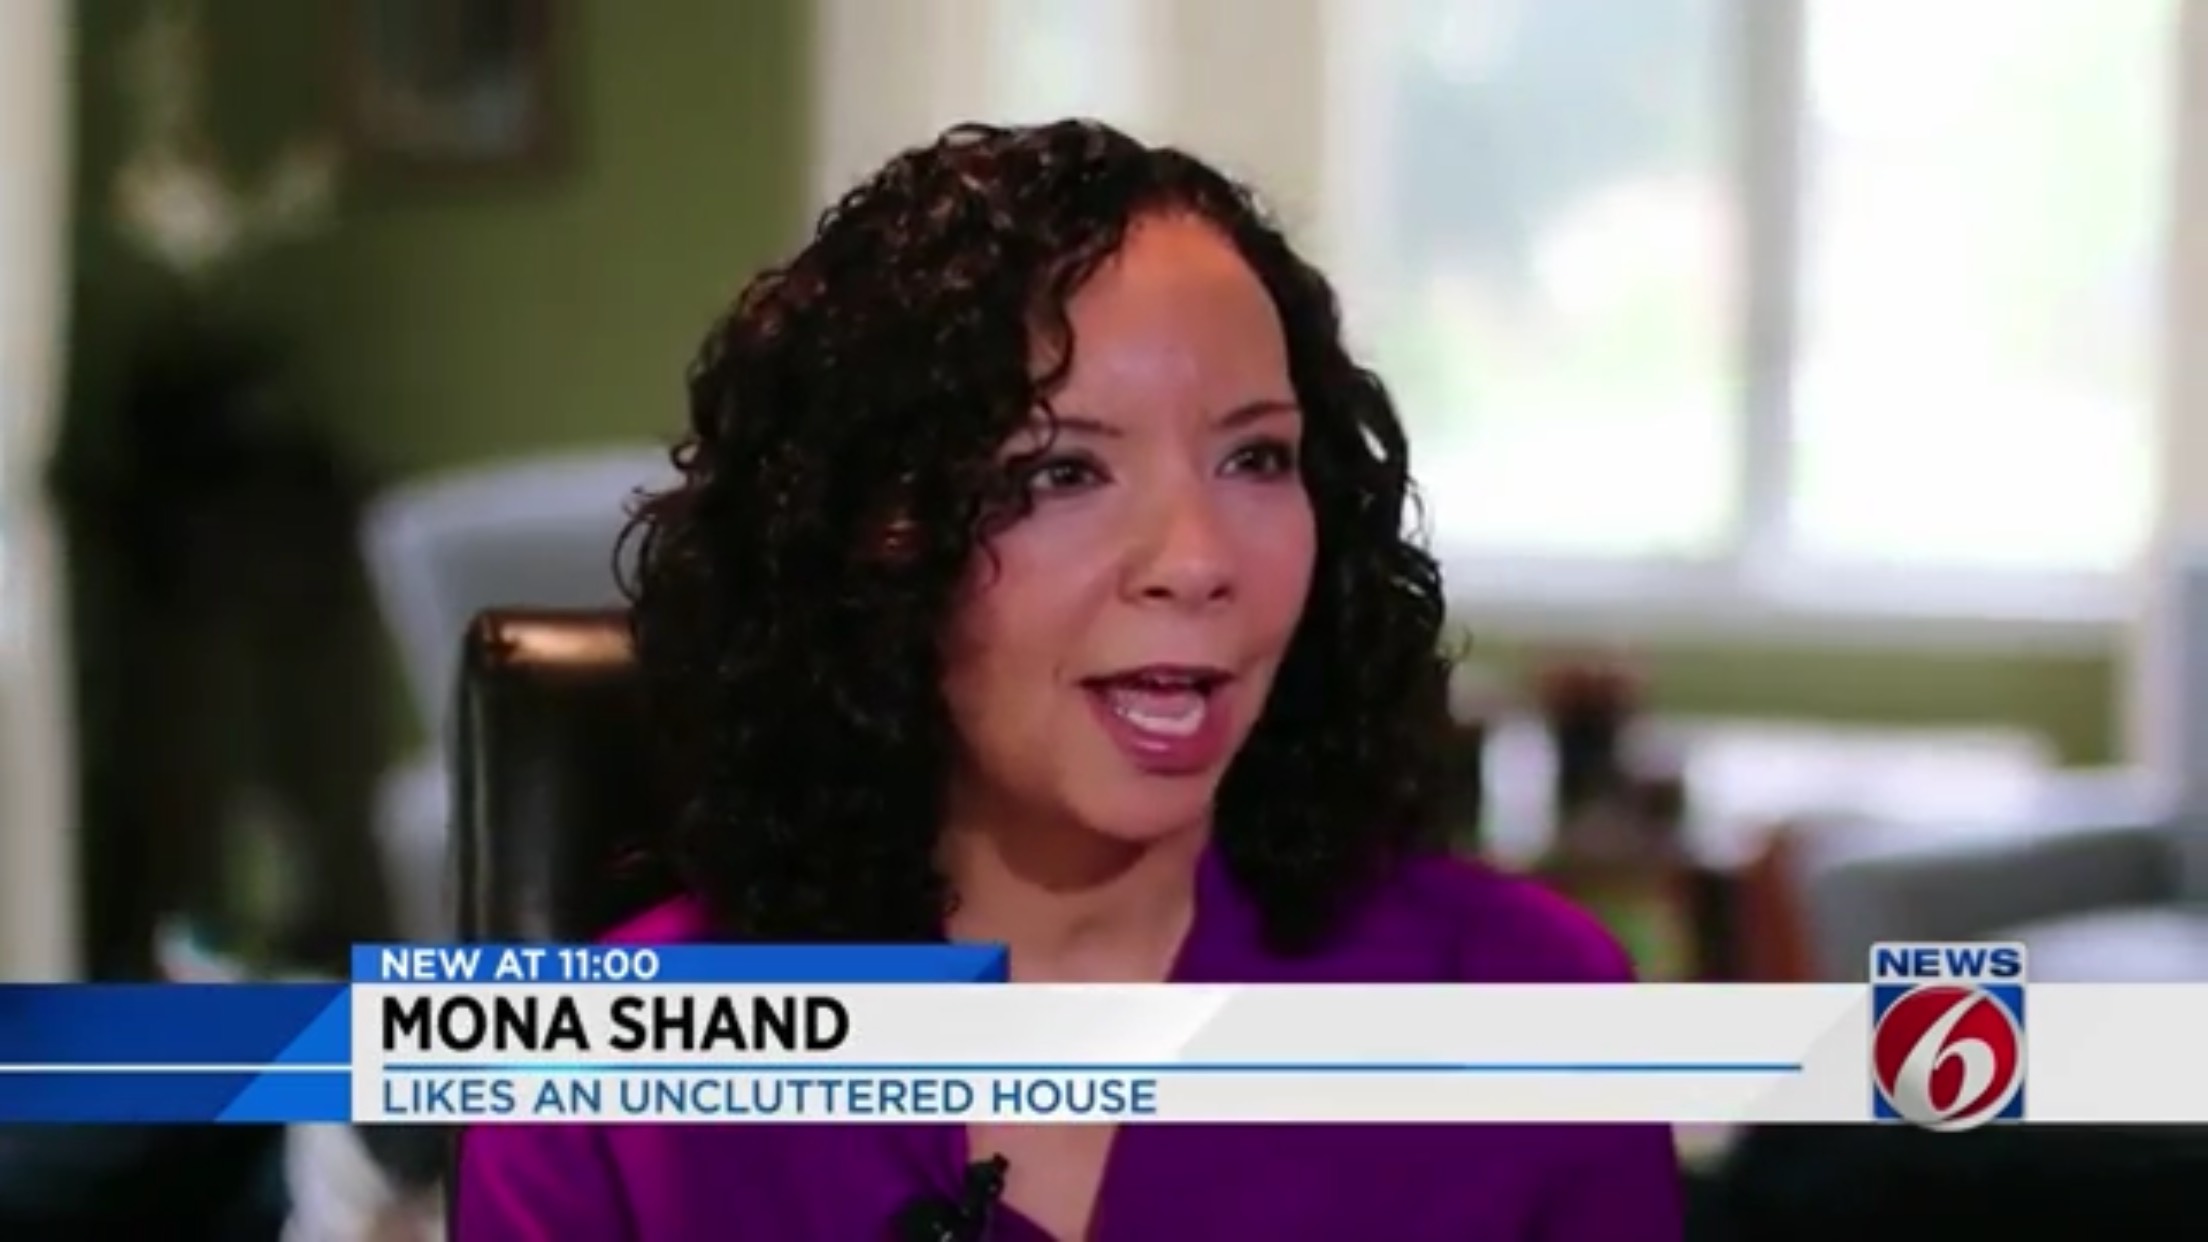 Mona Shand: Likes An Uncluttered House